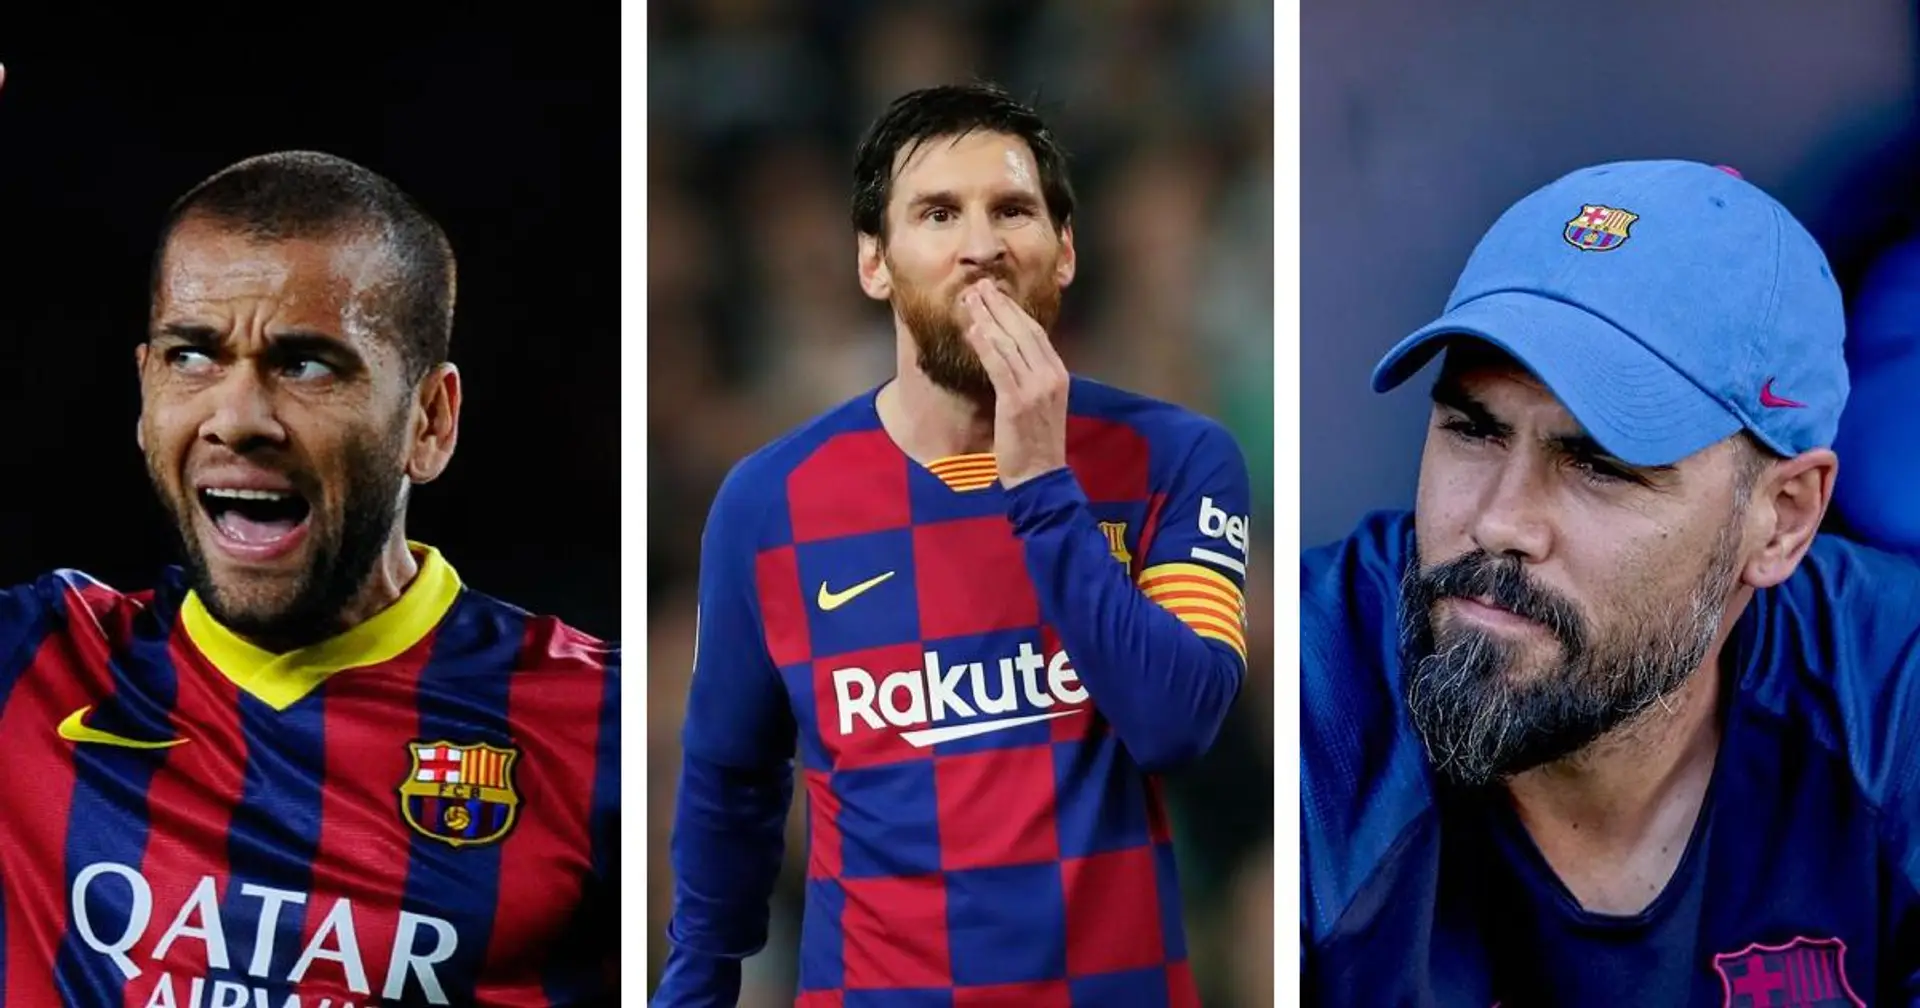 Leo Messi can become fourth Barca's great in modern history terribly mistreated by board